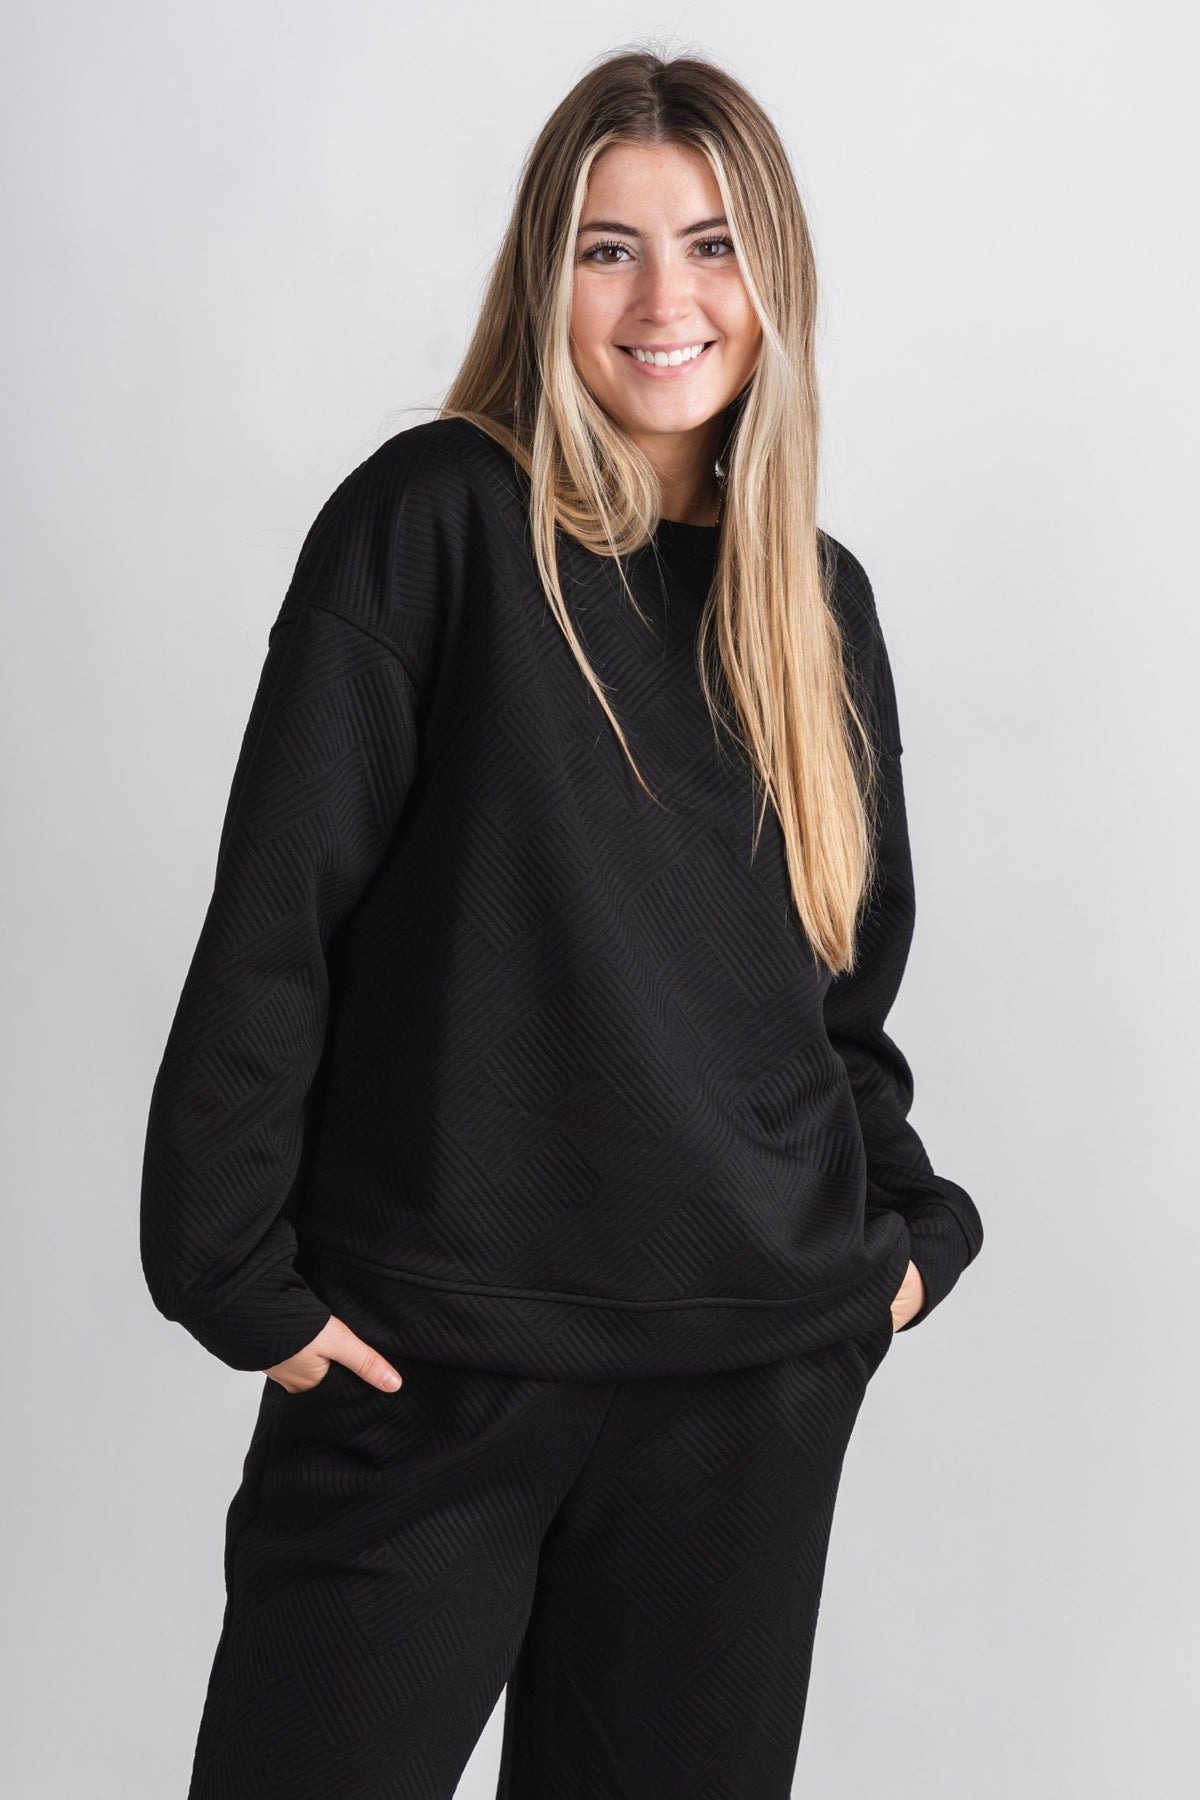 Textured long sleeve top black - Trendy Top - Cute Loungewear Collection at Lush Fashion Lounge Boutique in Oklahoma City